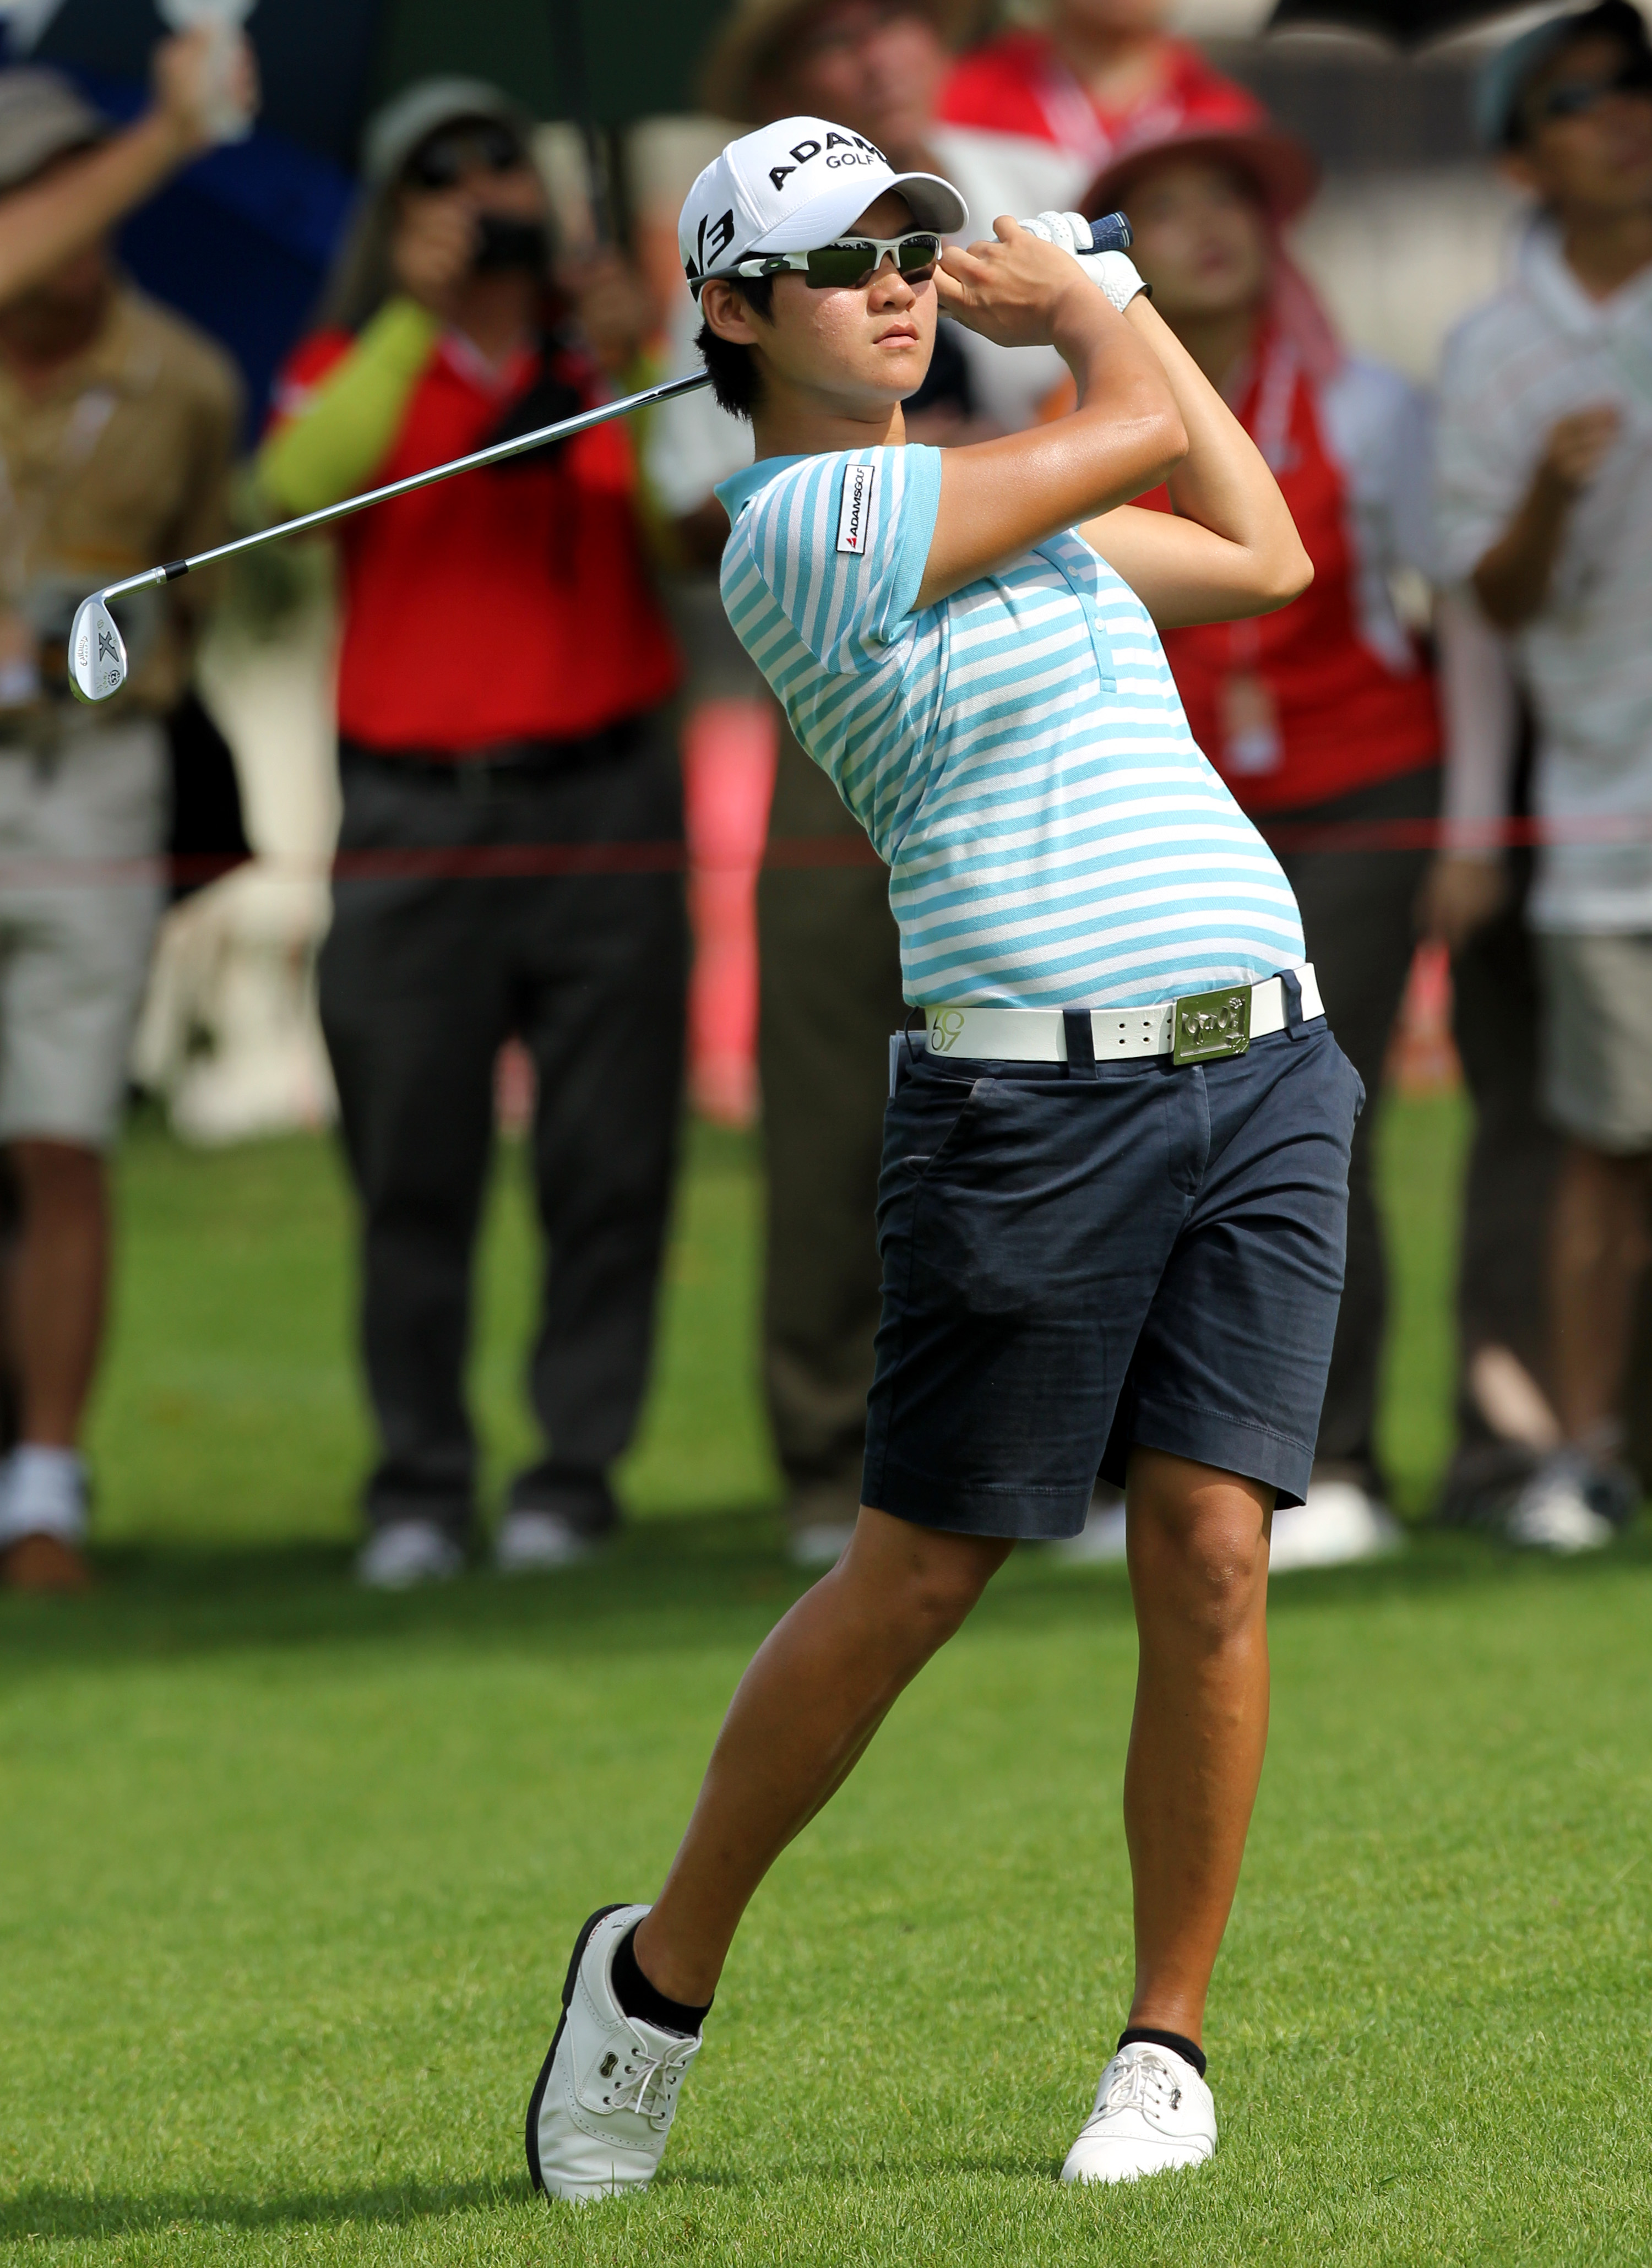 KUALA LUMPUR, MALAYSIA - OCTOBER 22: Yani Tseng of Taiwan watches her shot on the 3rd hole during Round One of the Sime Darby LPGA on October 22, 2010 at the Kuala Lumpur Golf and Country Club in Kuala Lumpur, Malaysia. (Photo by Stanley Chou/Getty Images